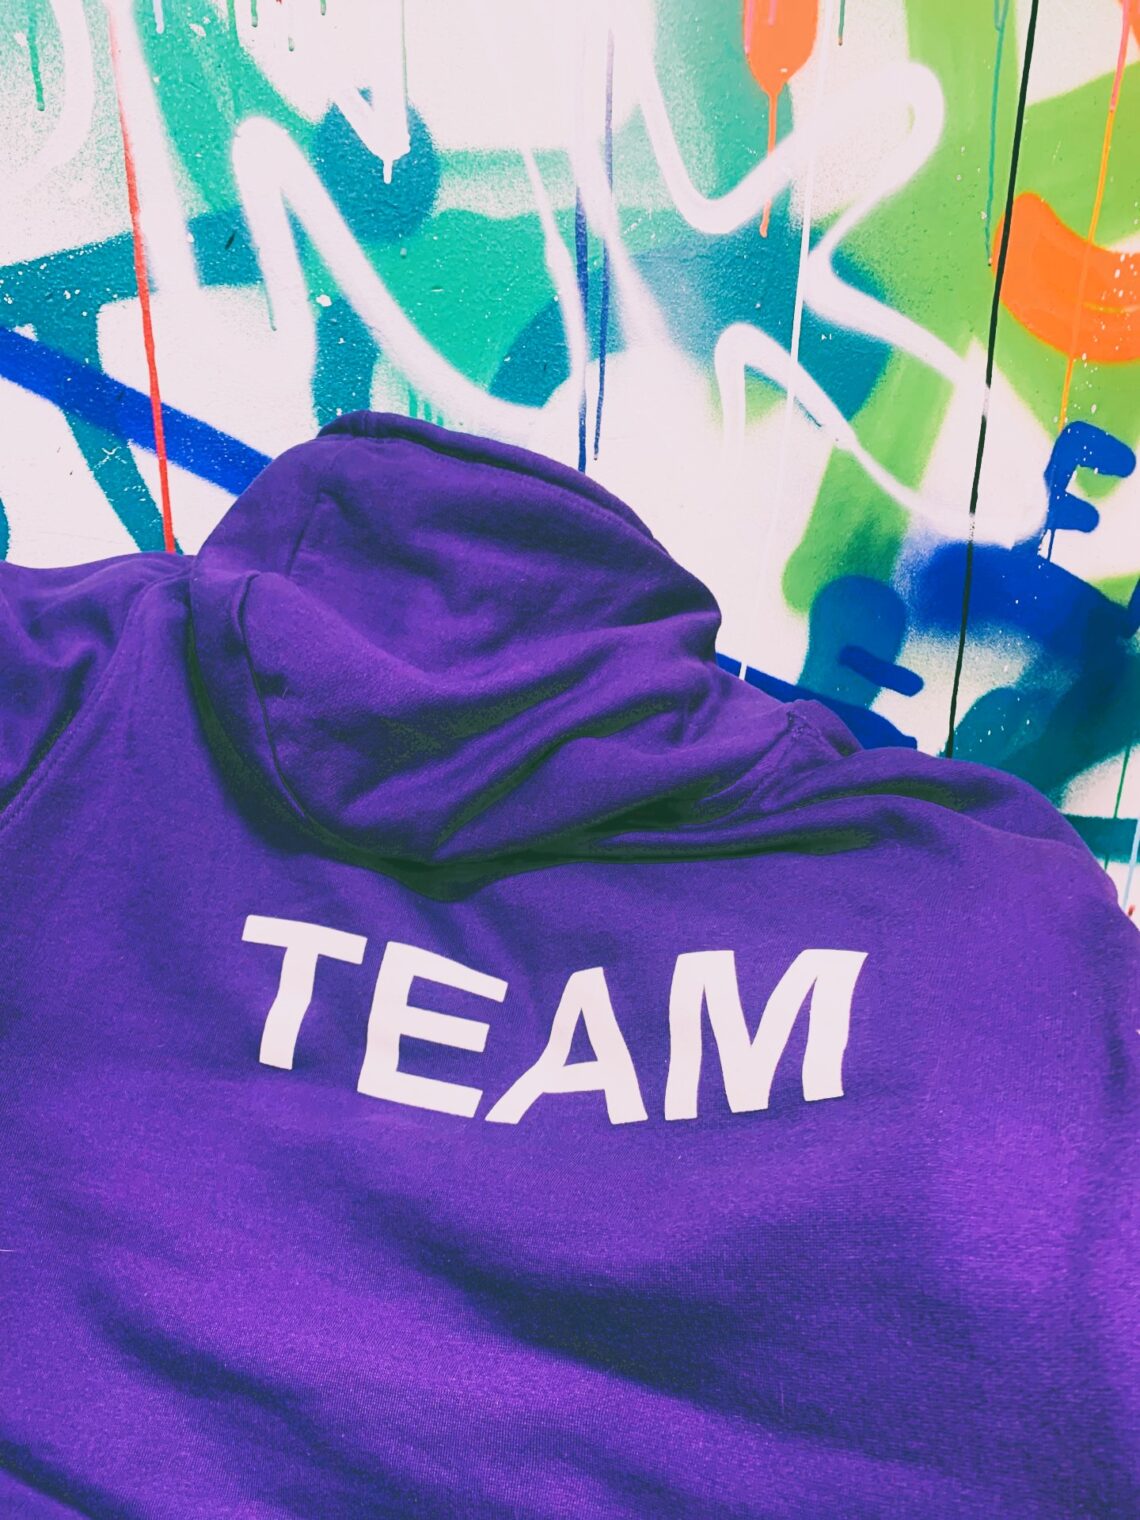 A purple hoodie with the word Team written on it in white letters